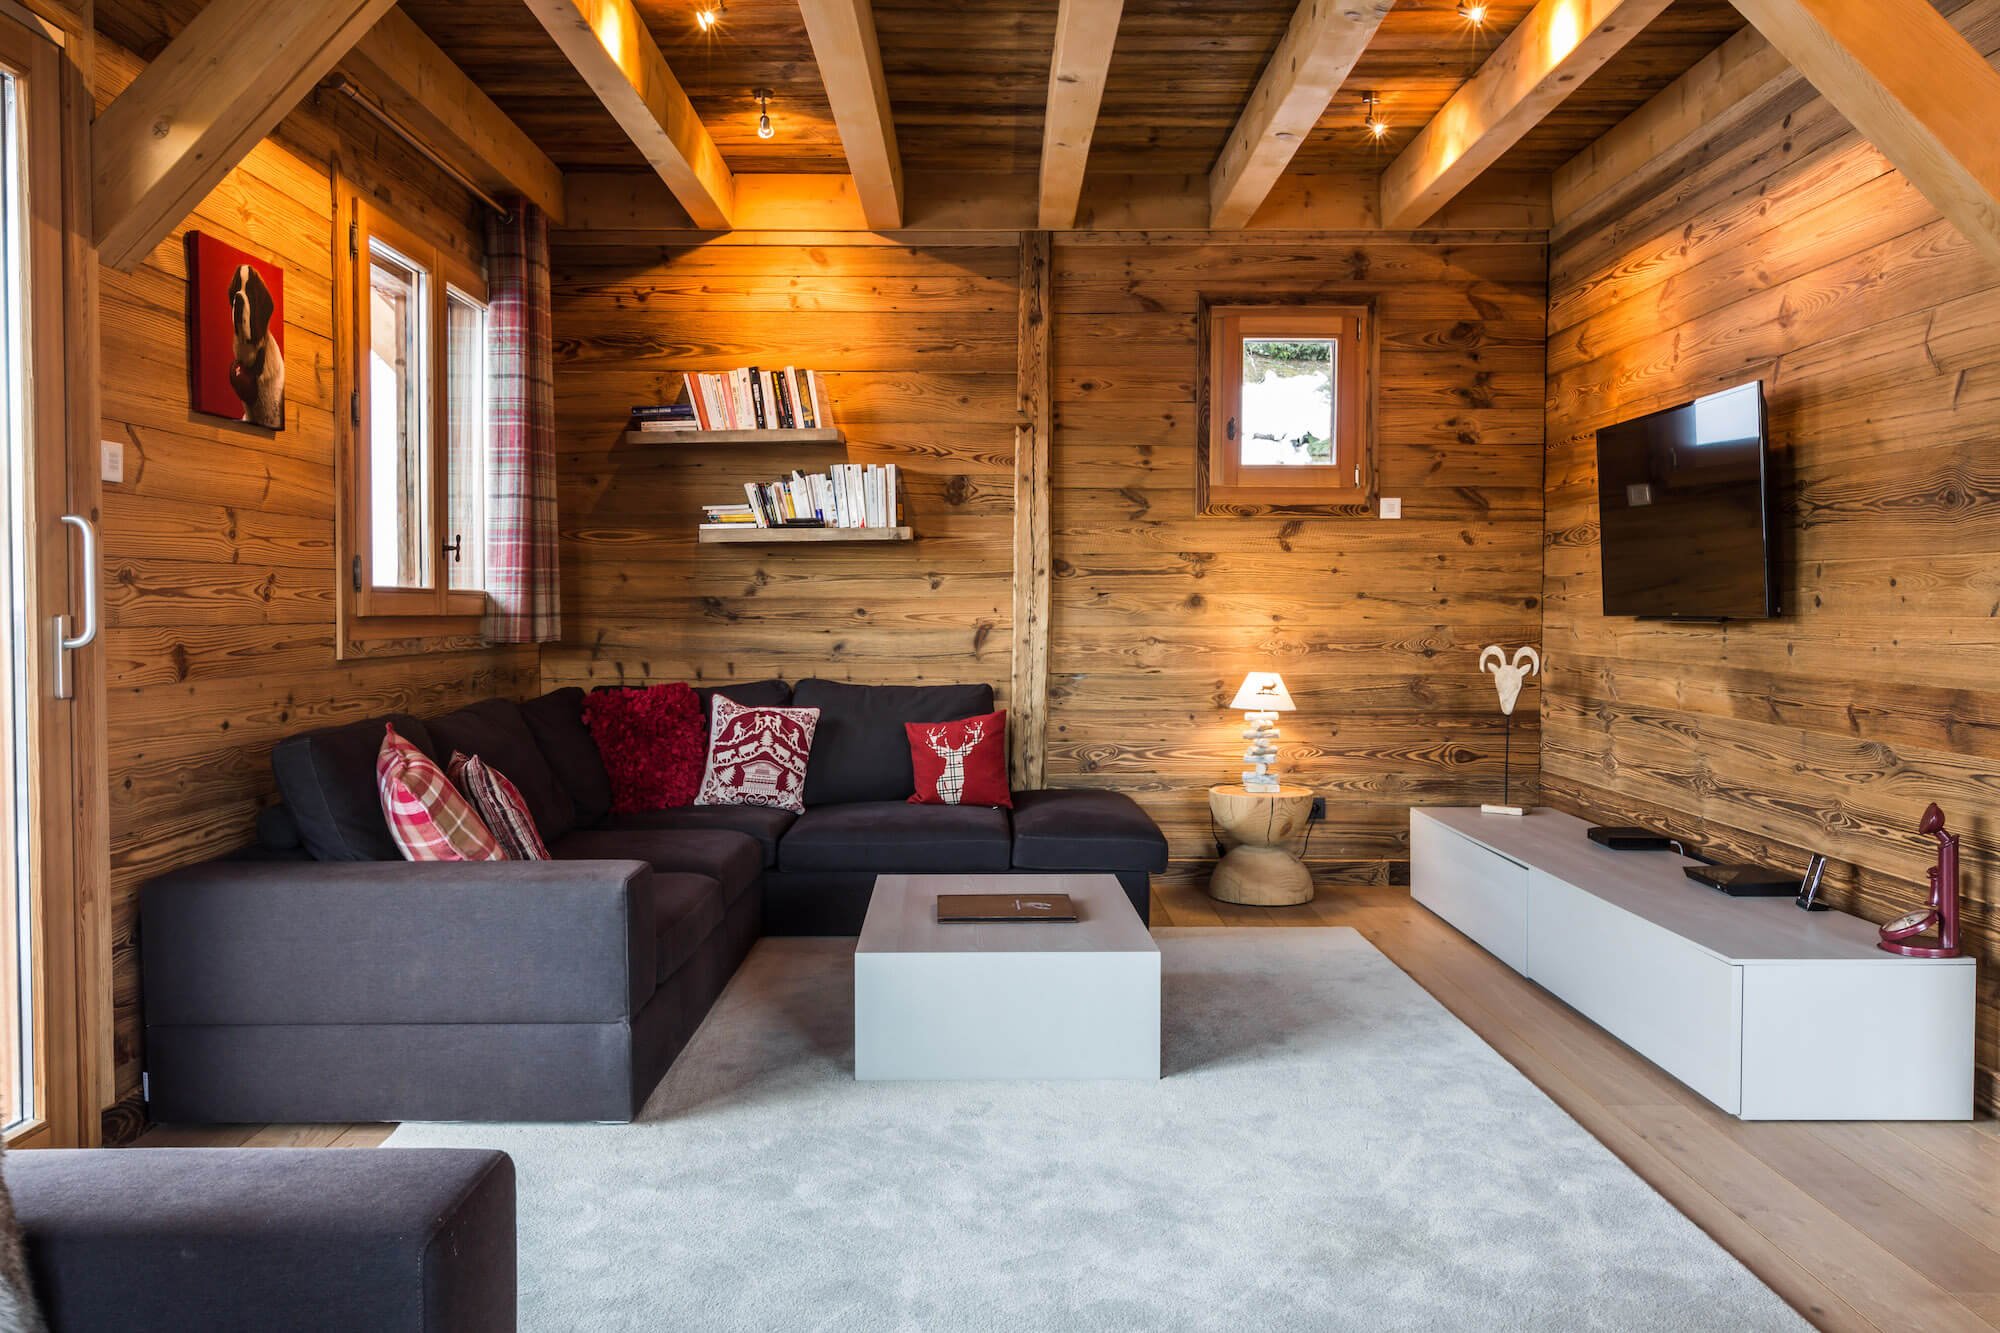 Prestigious chalet in Saint-Gervais for your seminar in the Alps at the foot of the slopes